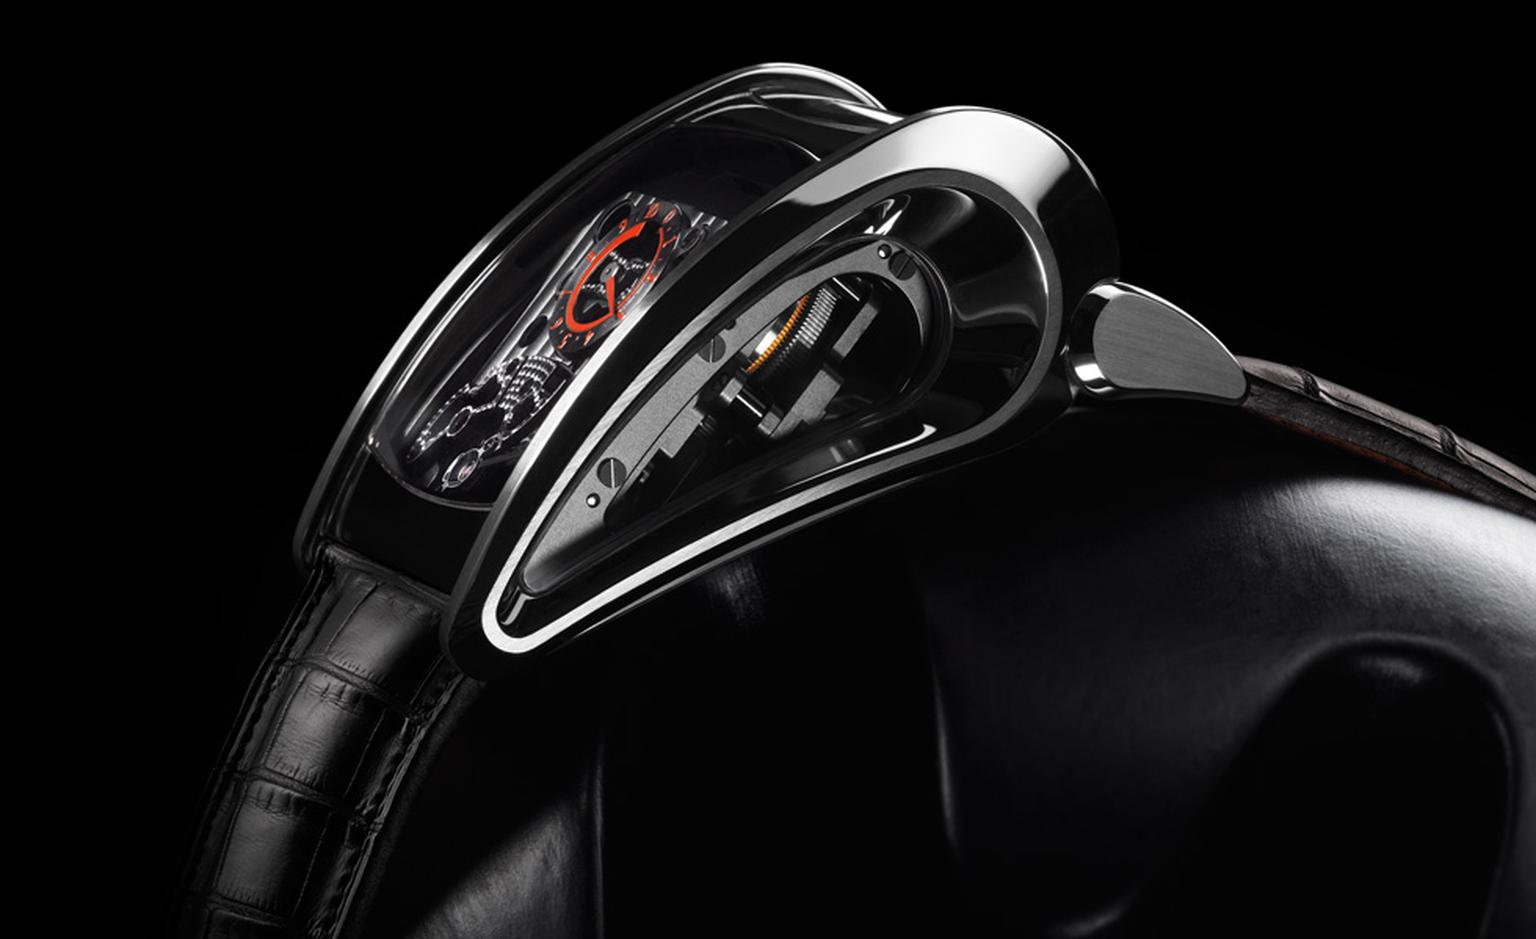 Profile of the Parmigiani Fleurier Bugatti Super Sport watch that is all stealth curves and made for speed.